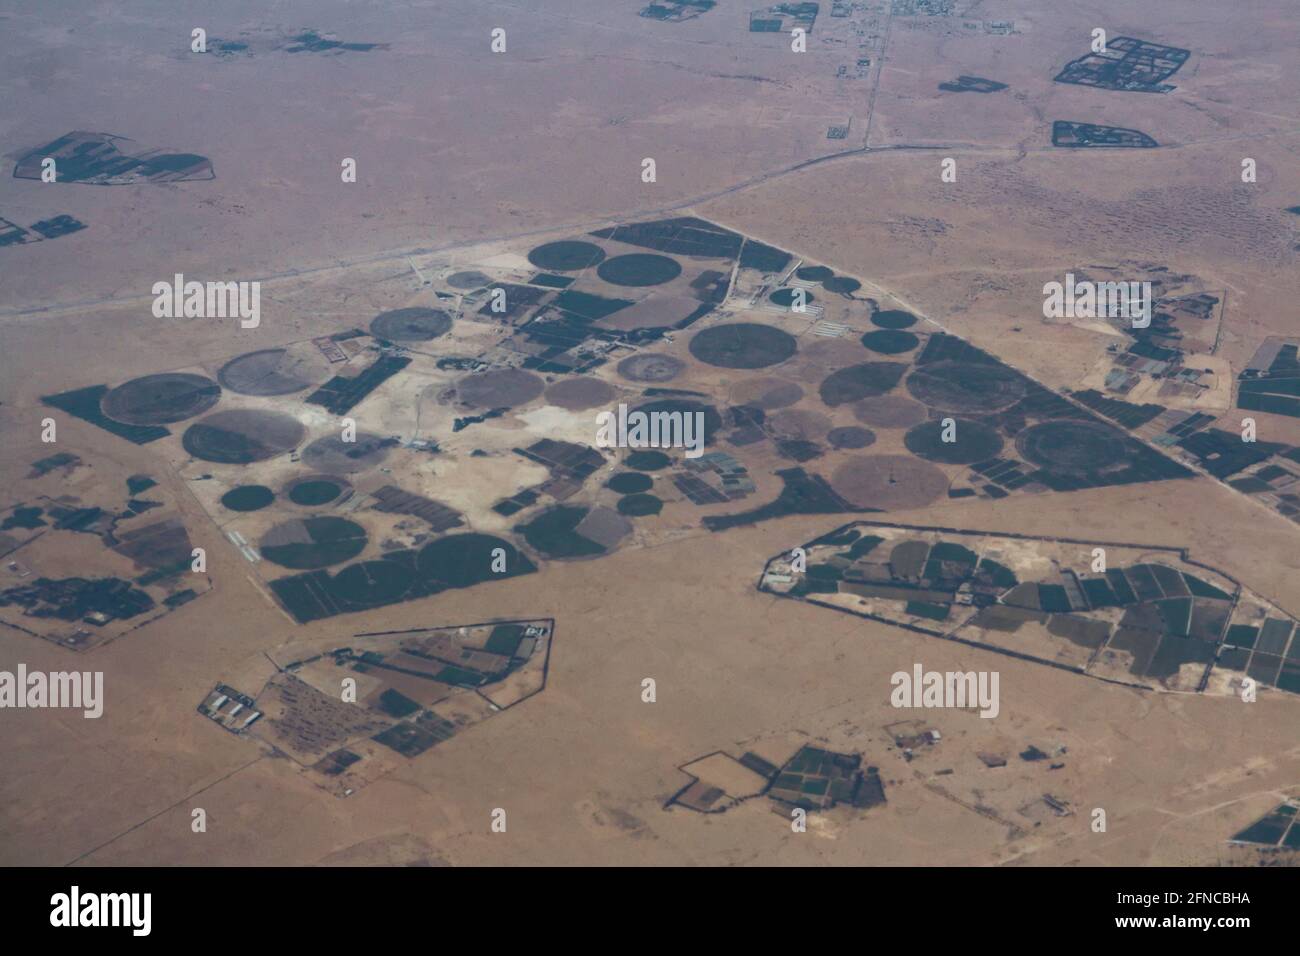 Doha – Qatar, May 12, 2021: Aerial view showing circular irrigation patterns of farms surrounded by desert Stock Photo